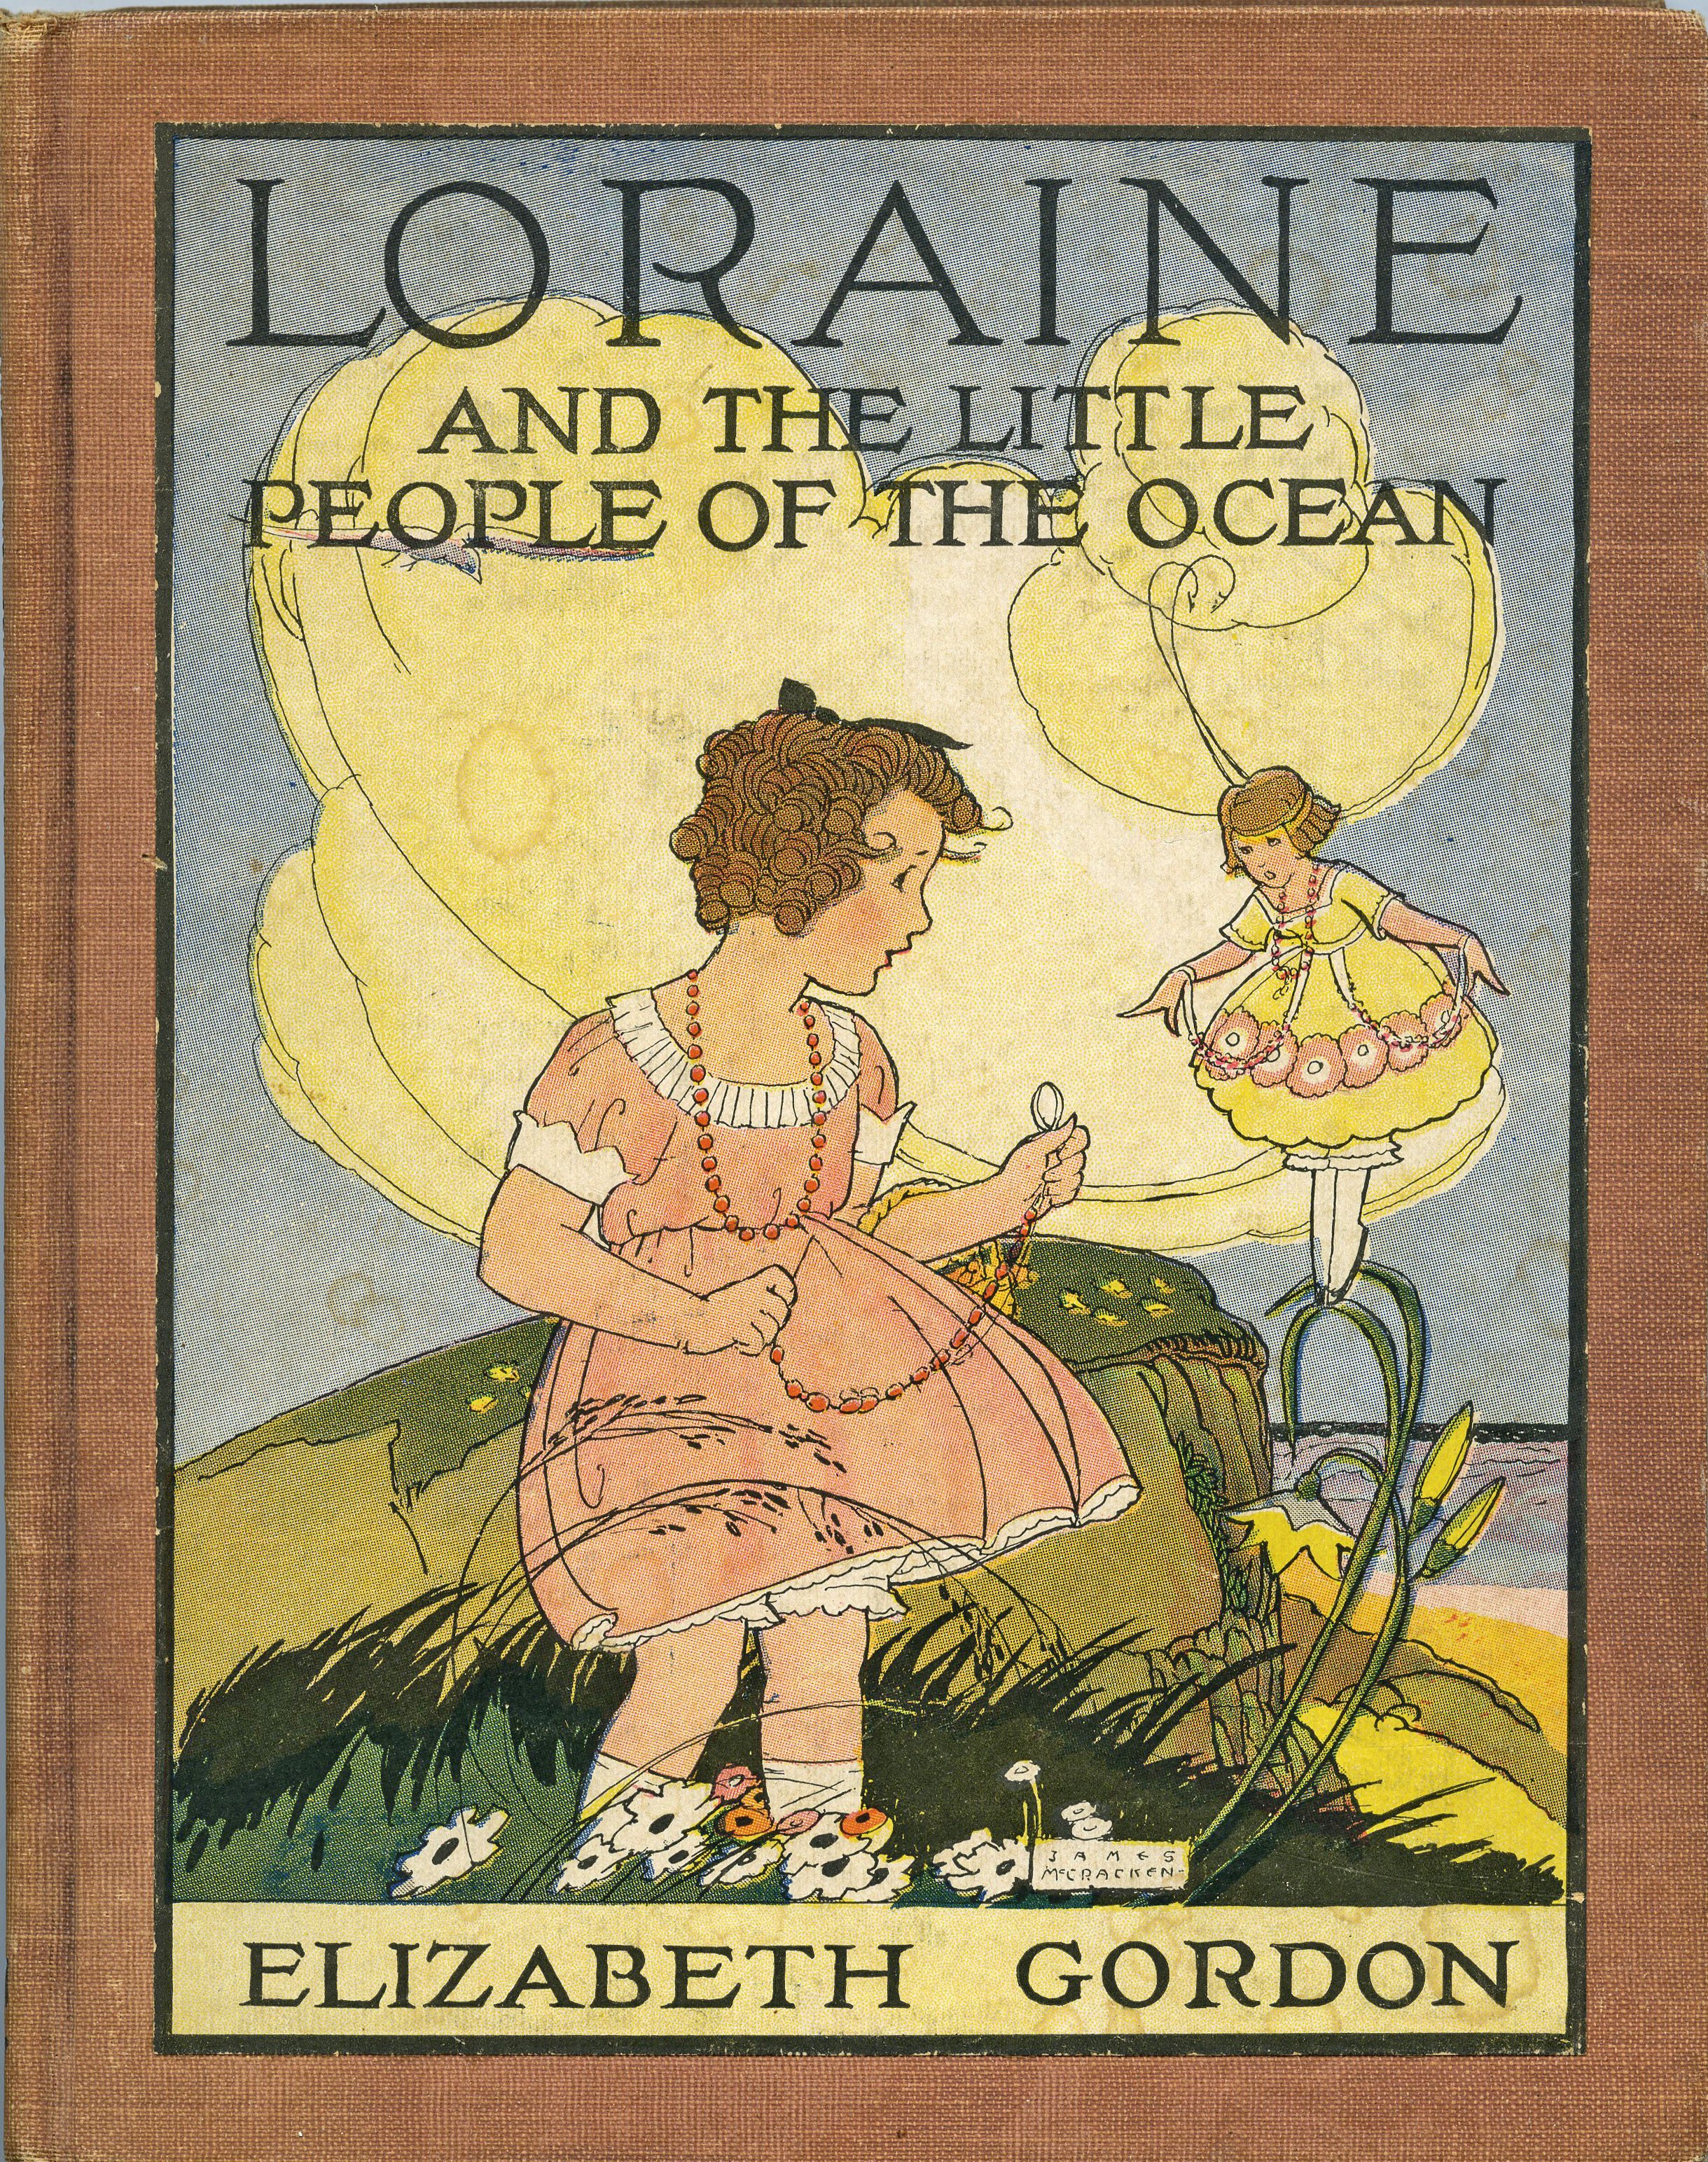 Loraine and the Little People of the Ocean